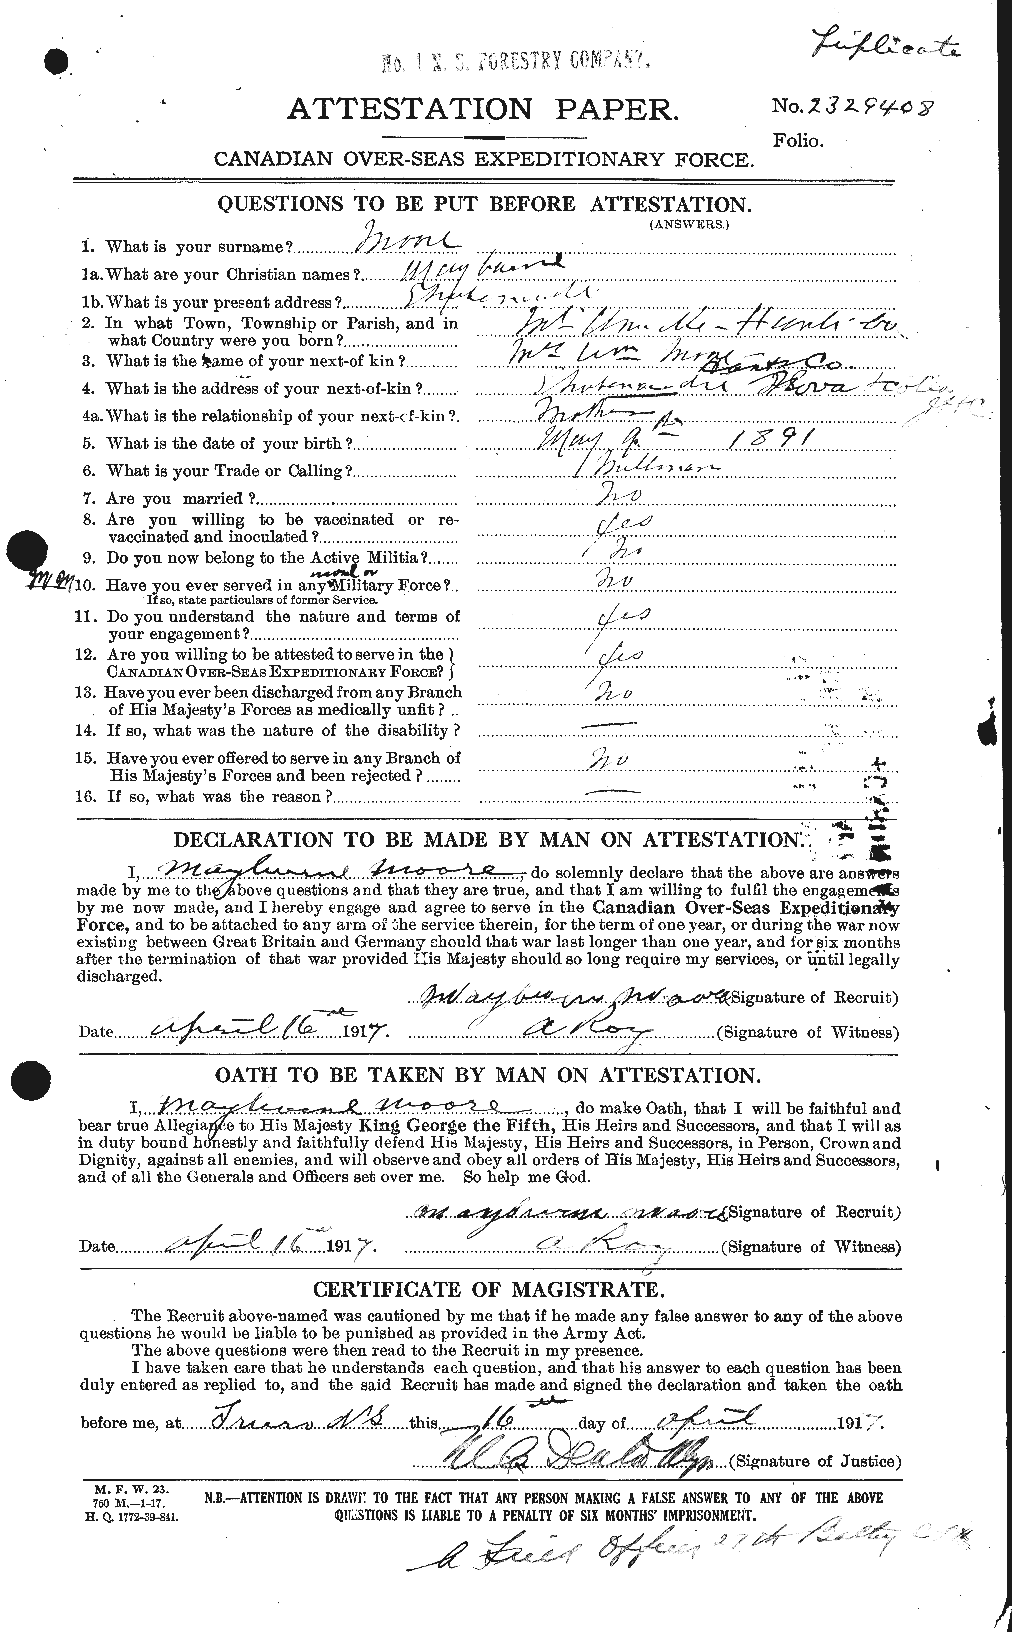 Personnel Records of the First World War - CEF 503435a